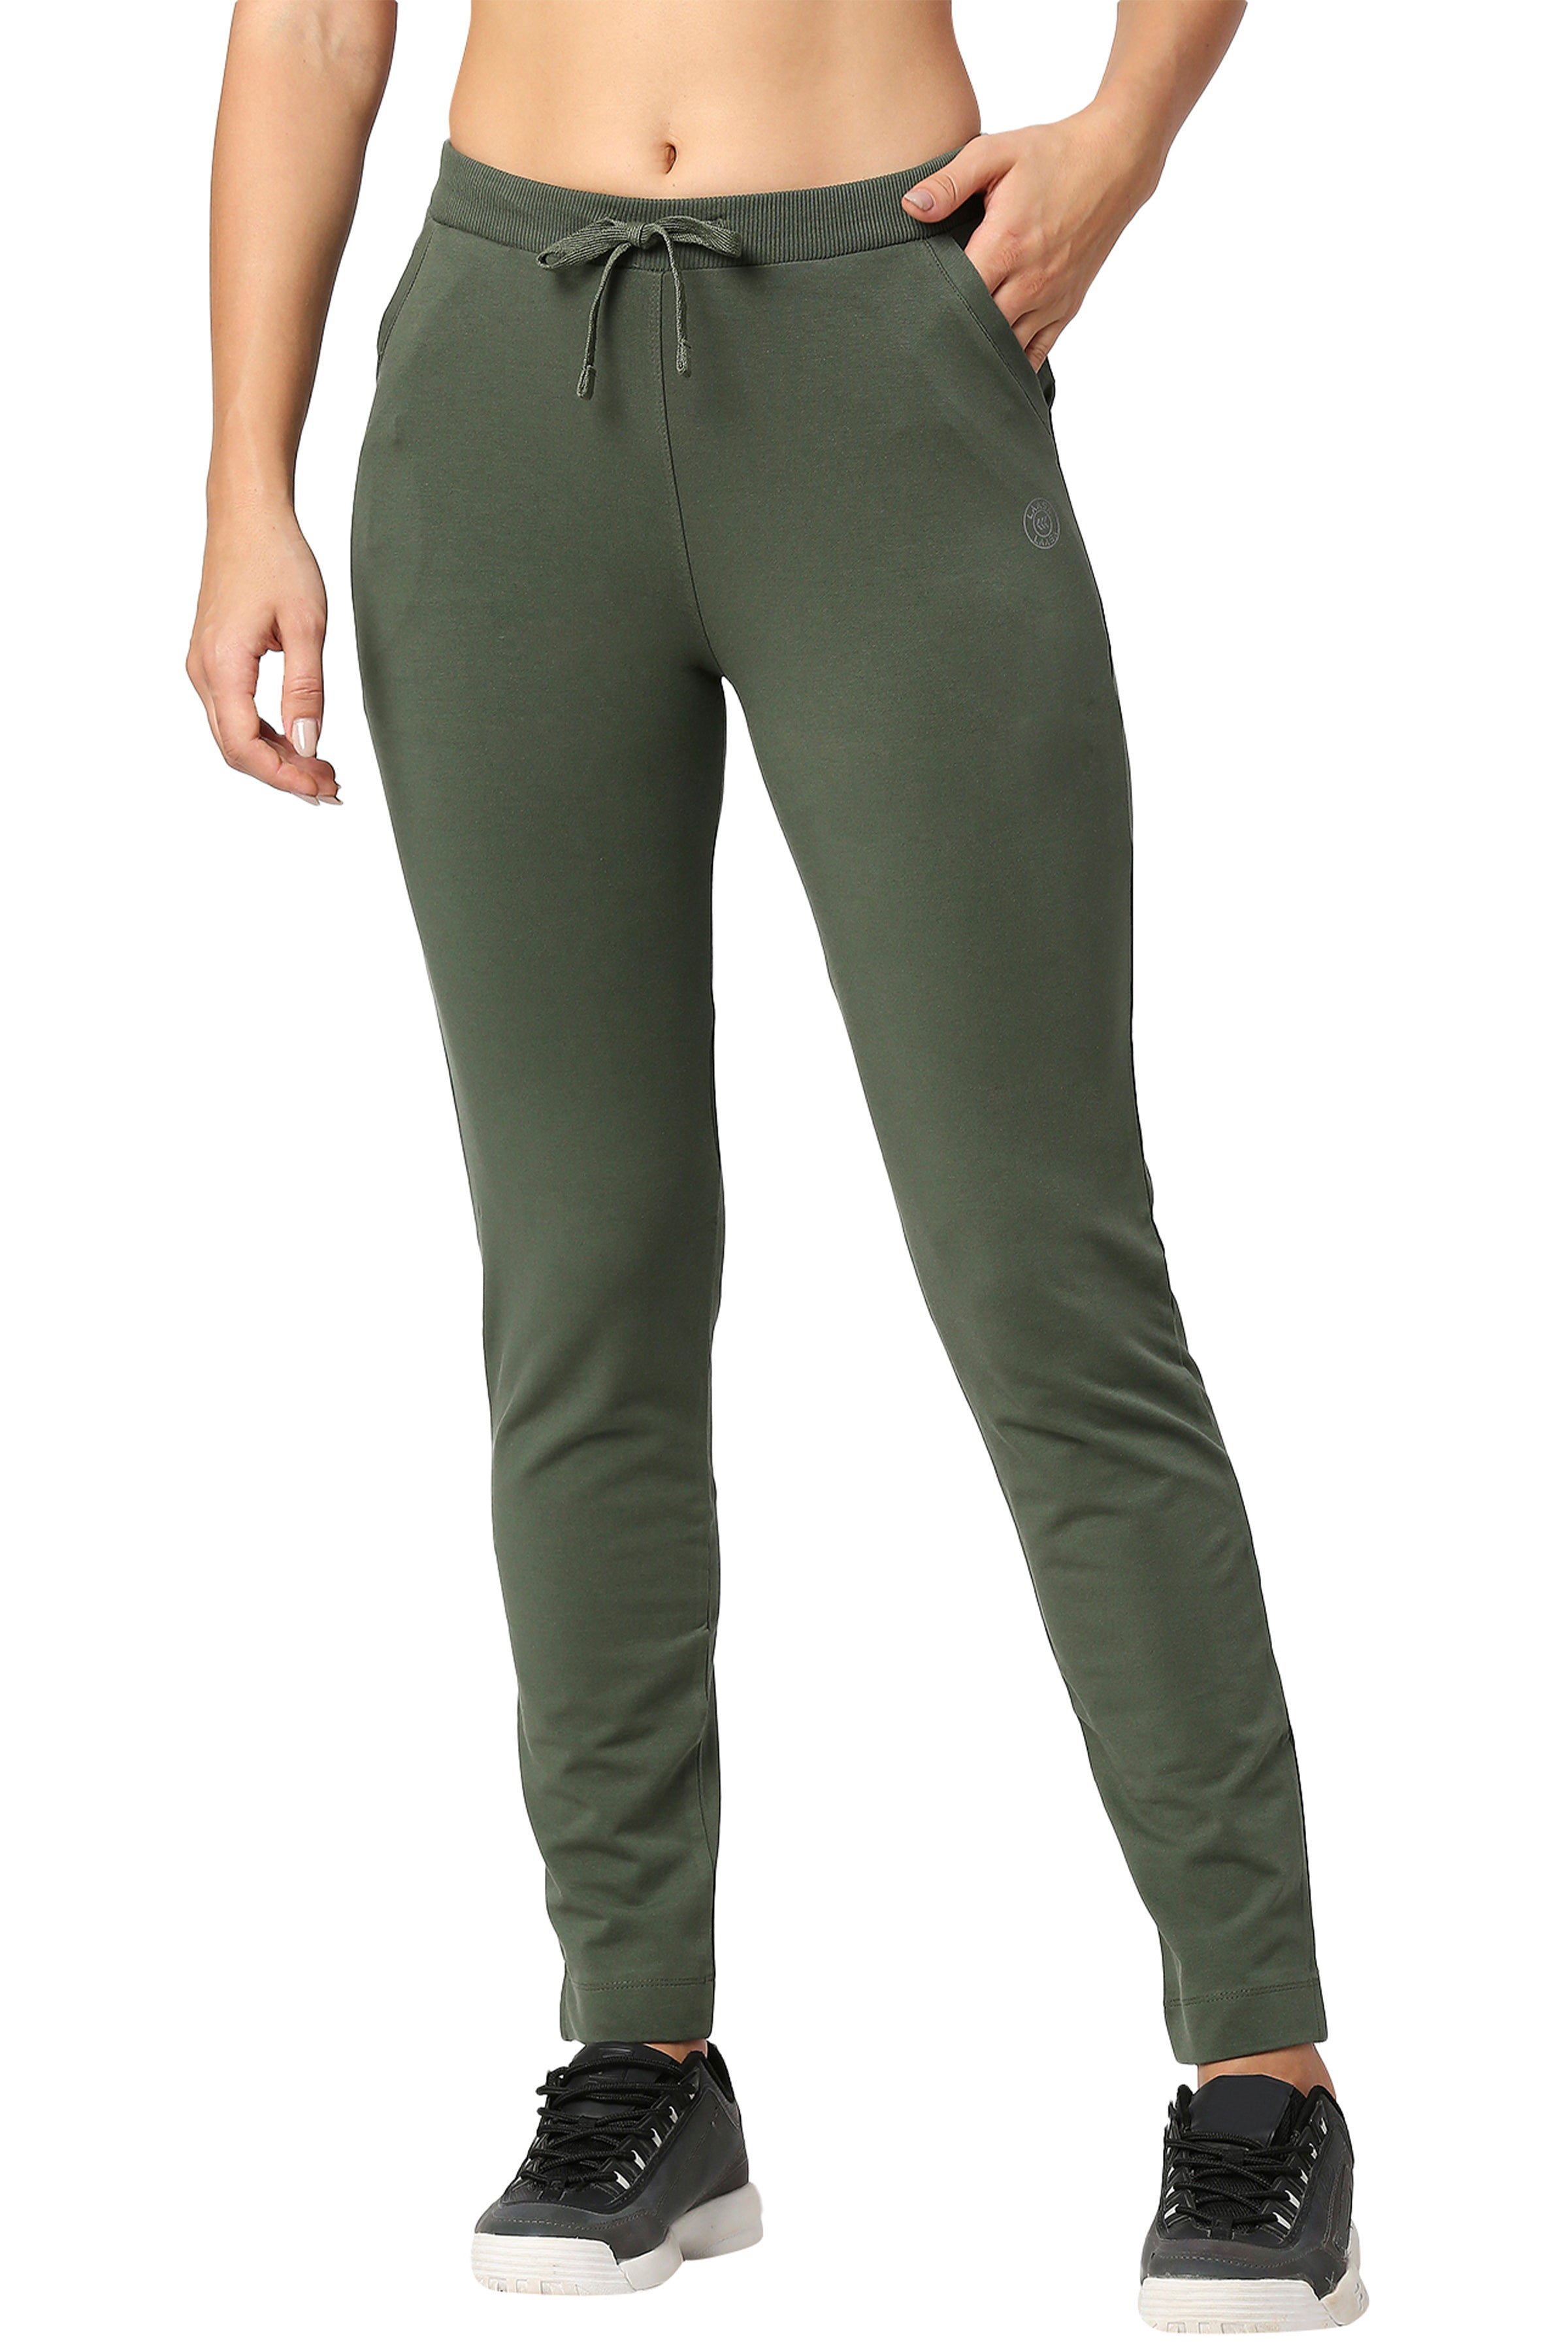 Best Womens Track Pants Online Shopping India : TT Bazaar – Tagged 